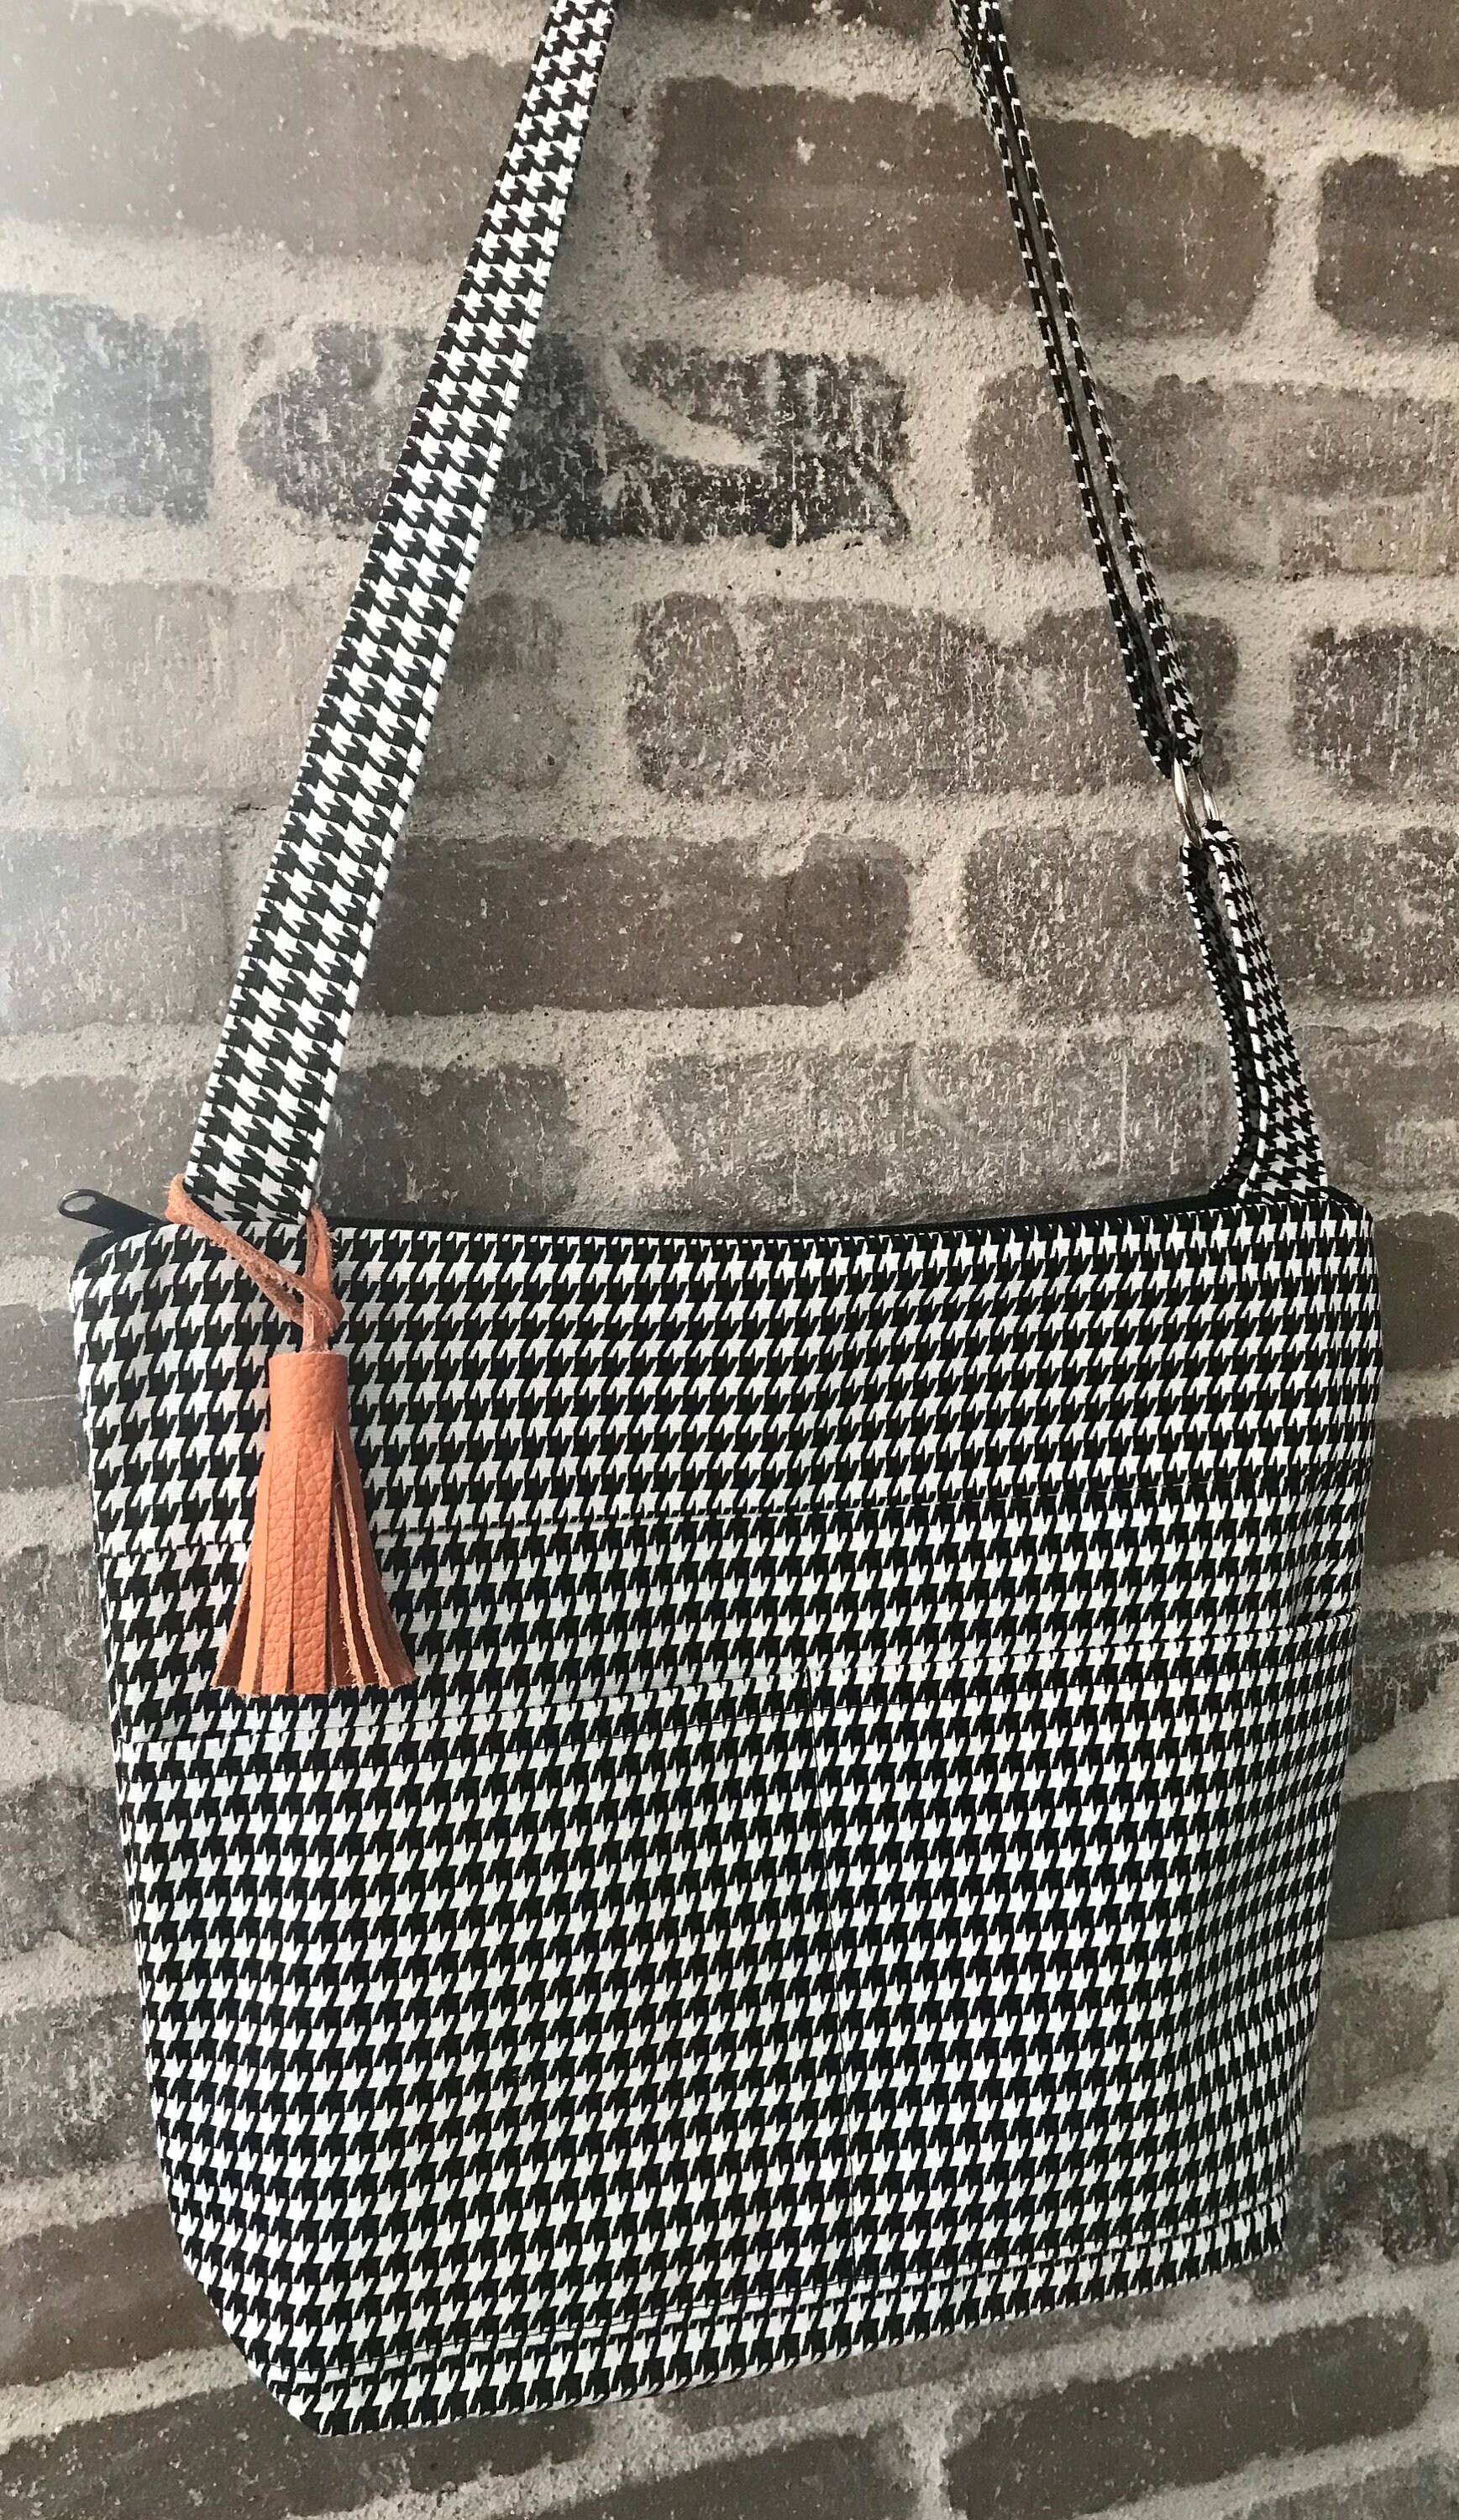 SMALL Purse Black and White Houndstooth check cotton | Etsy